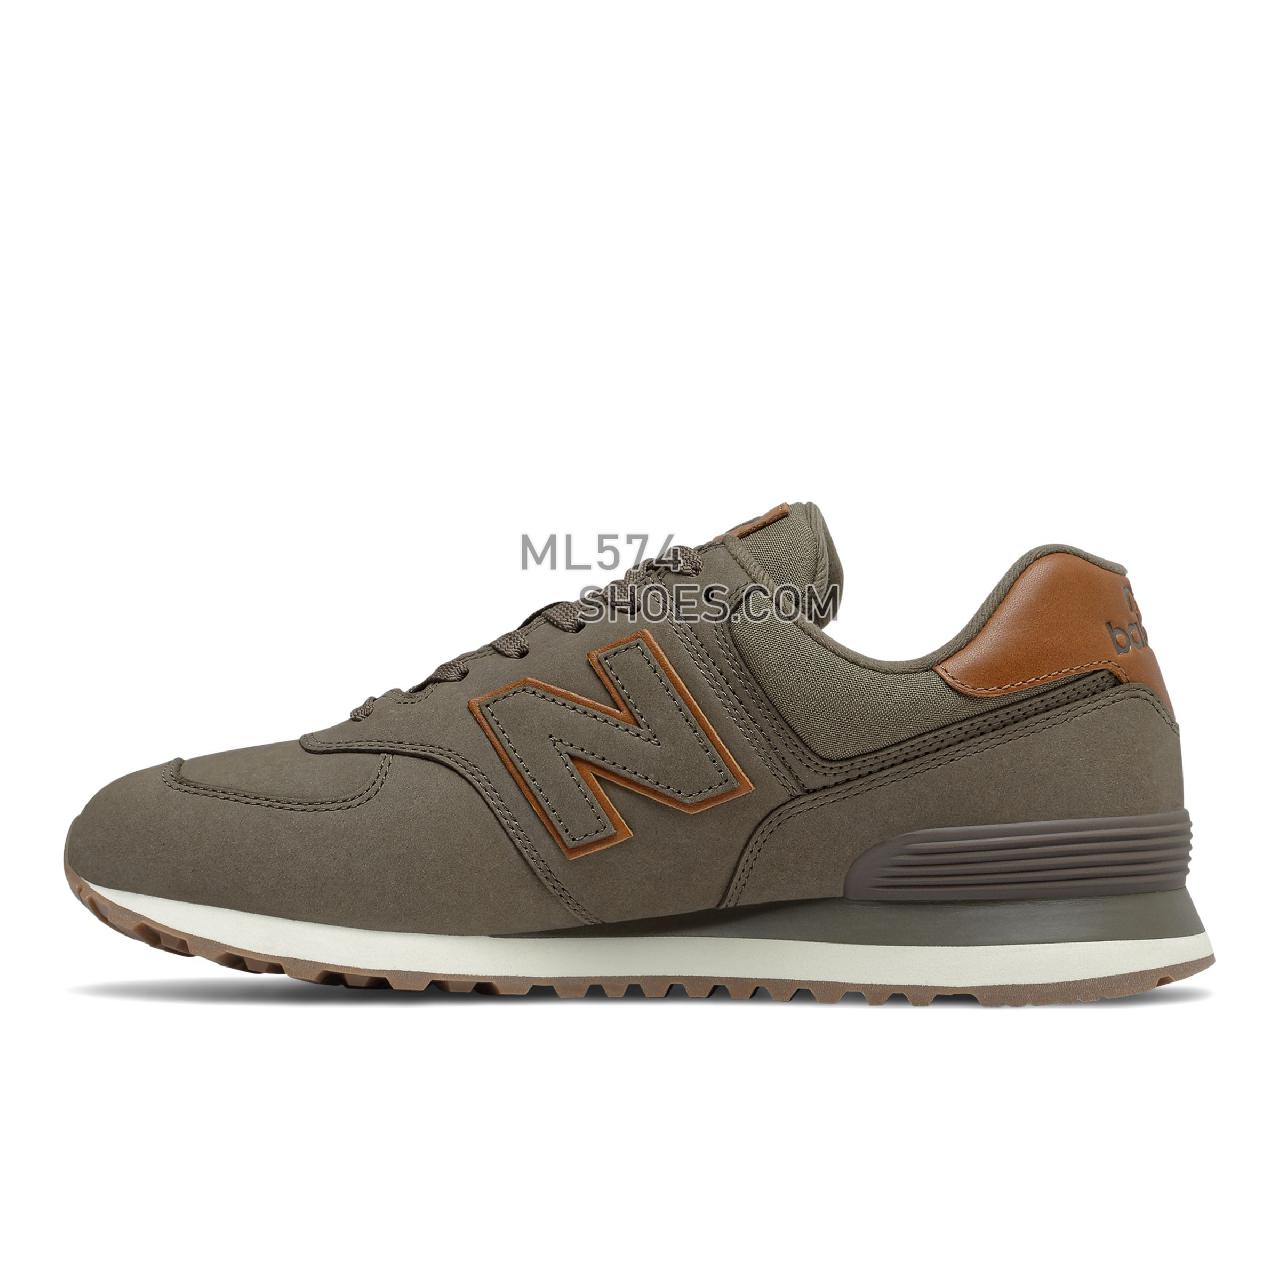 New Balance 574v2 - Men's Classic Sneakers - Wren with Tan and Sea Salt - ML574NW2